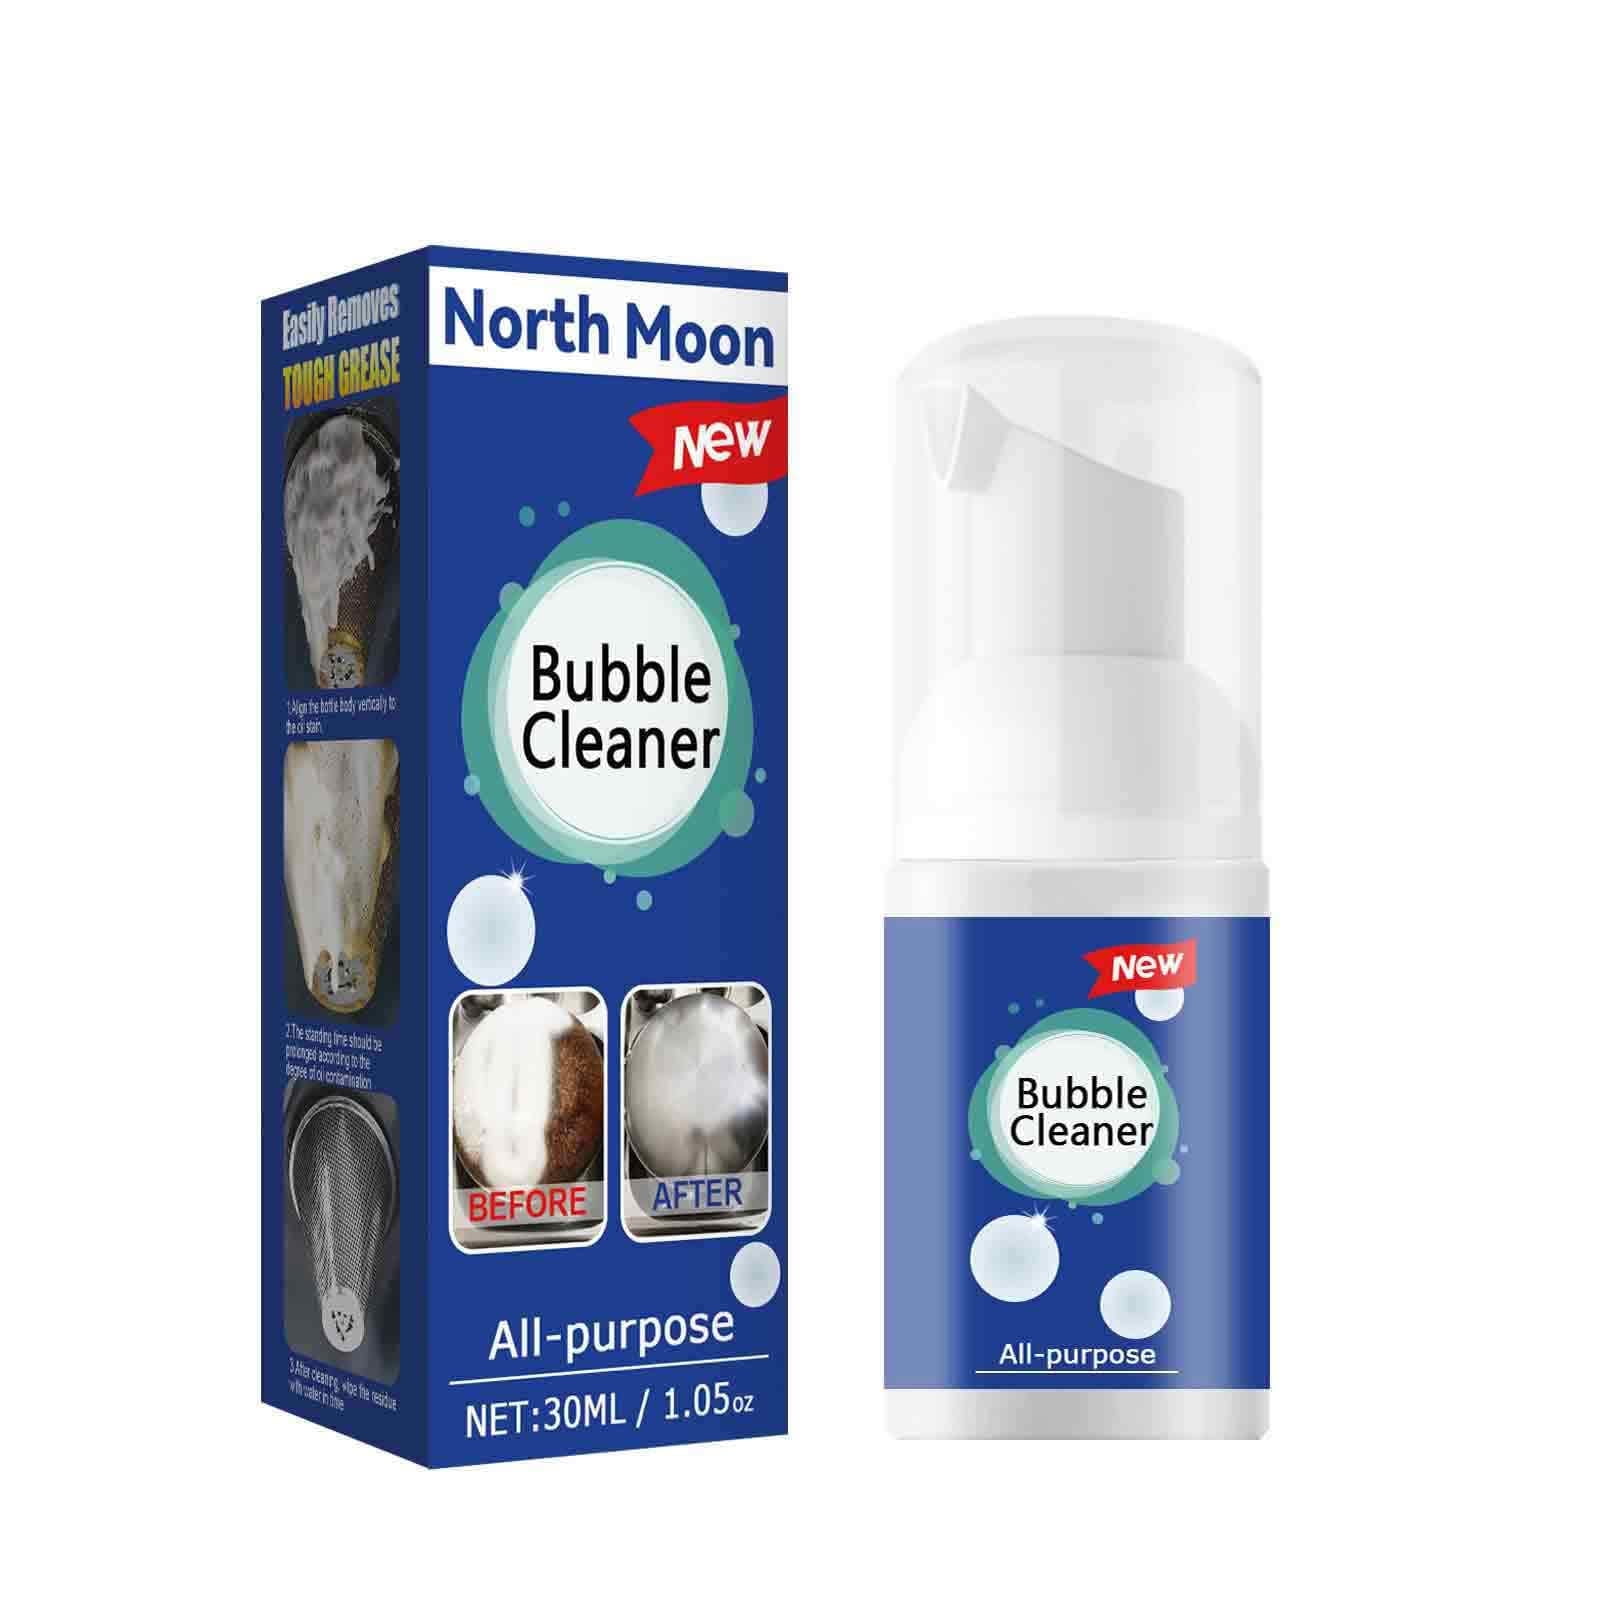 North Moon Bubble Cleaner reviews